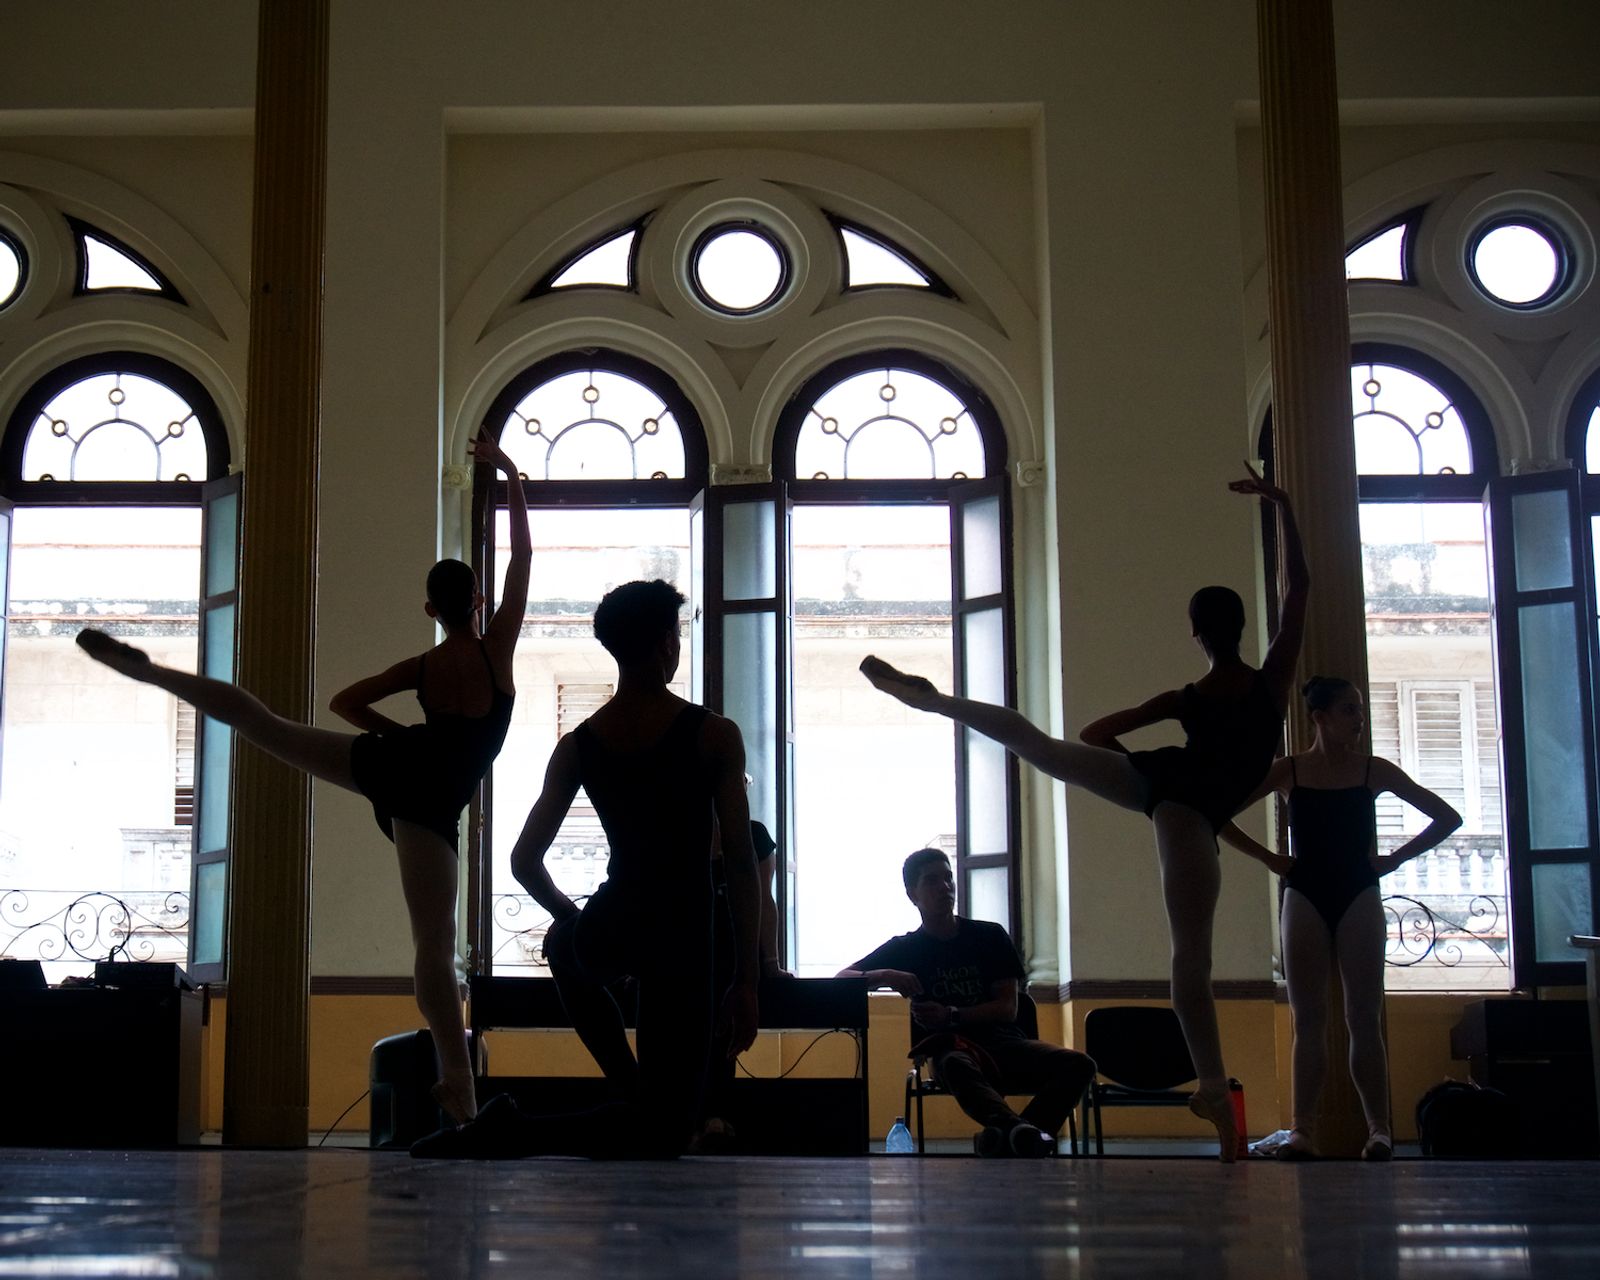 © Tina Gutierrez - Image from the Cuba National School of Ballet photography project